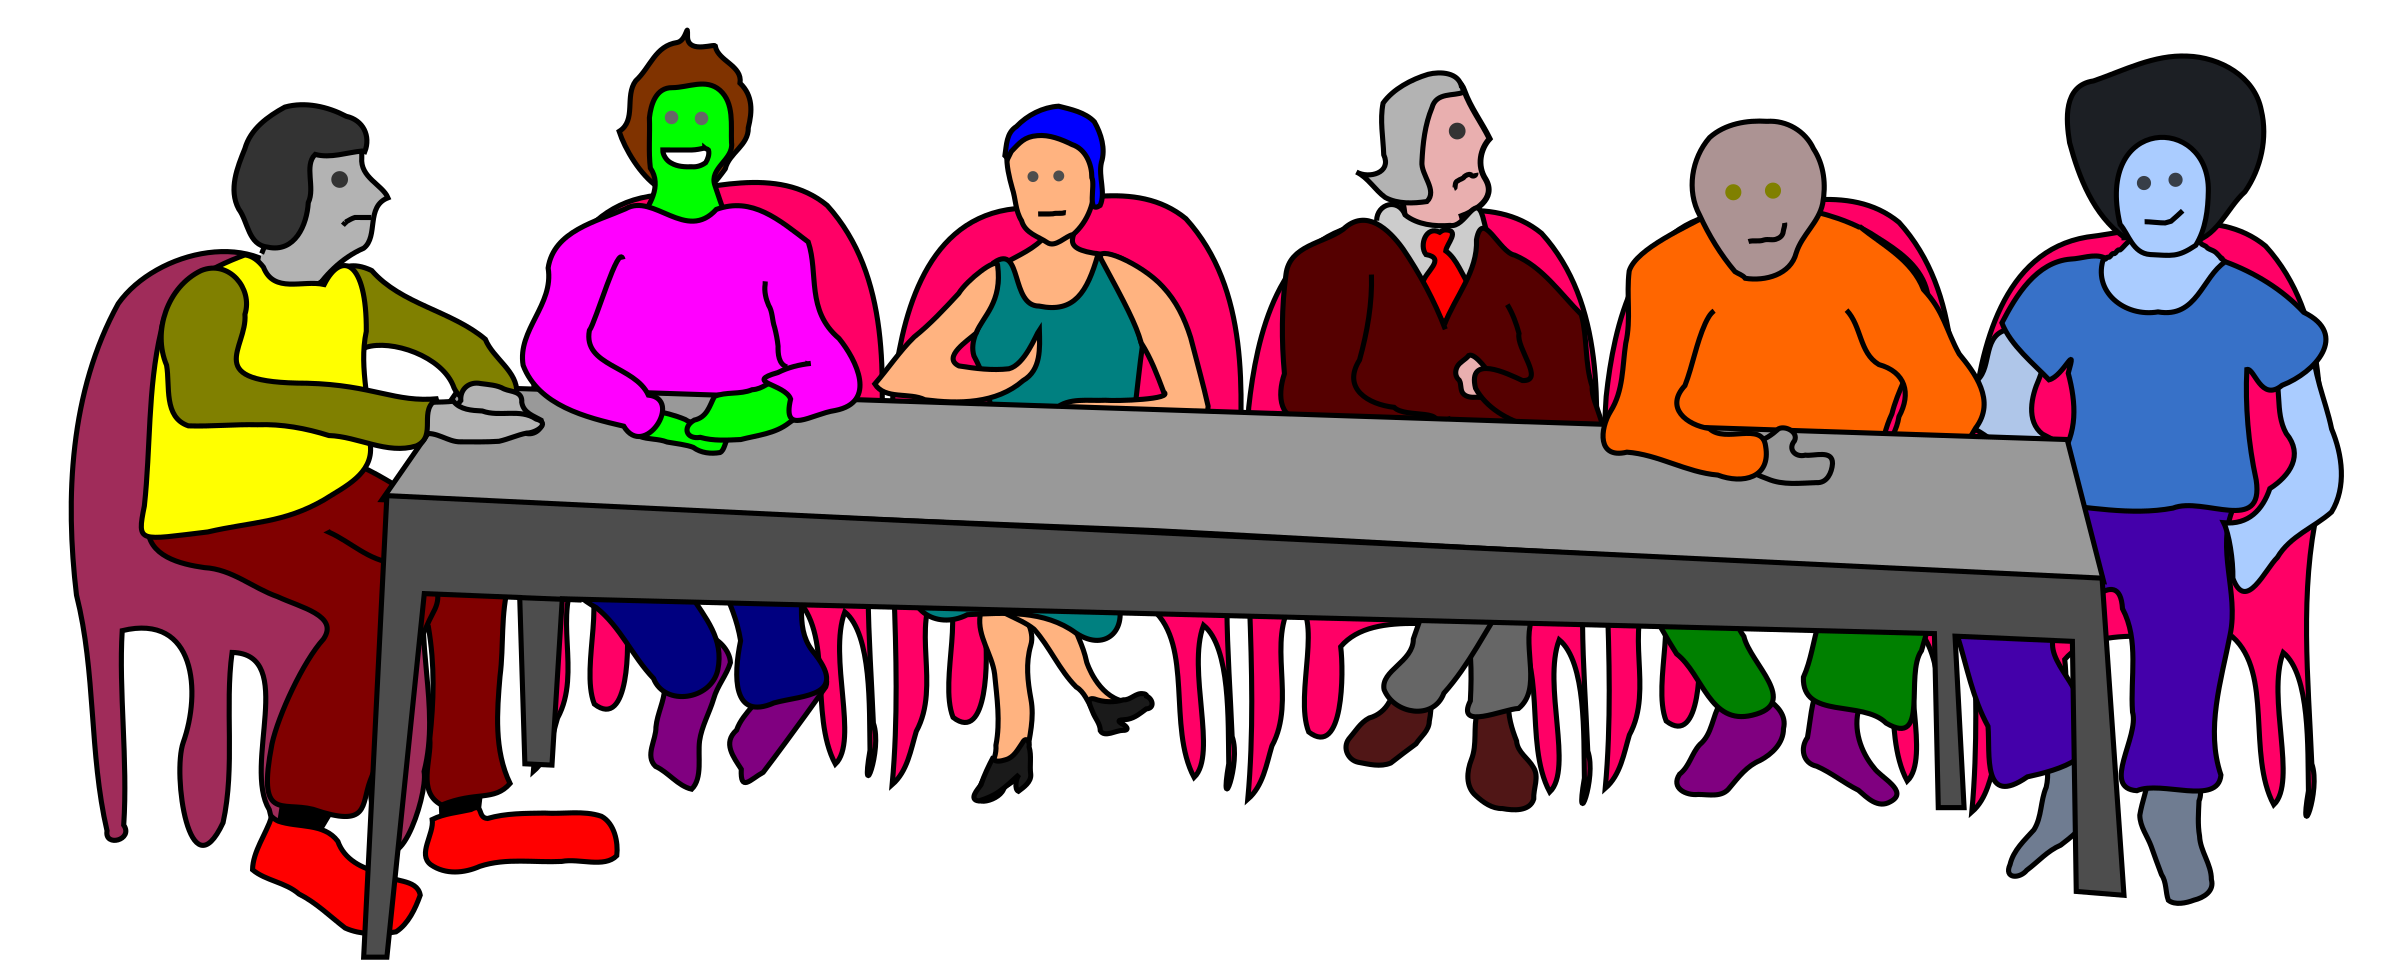 office clipart meeting